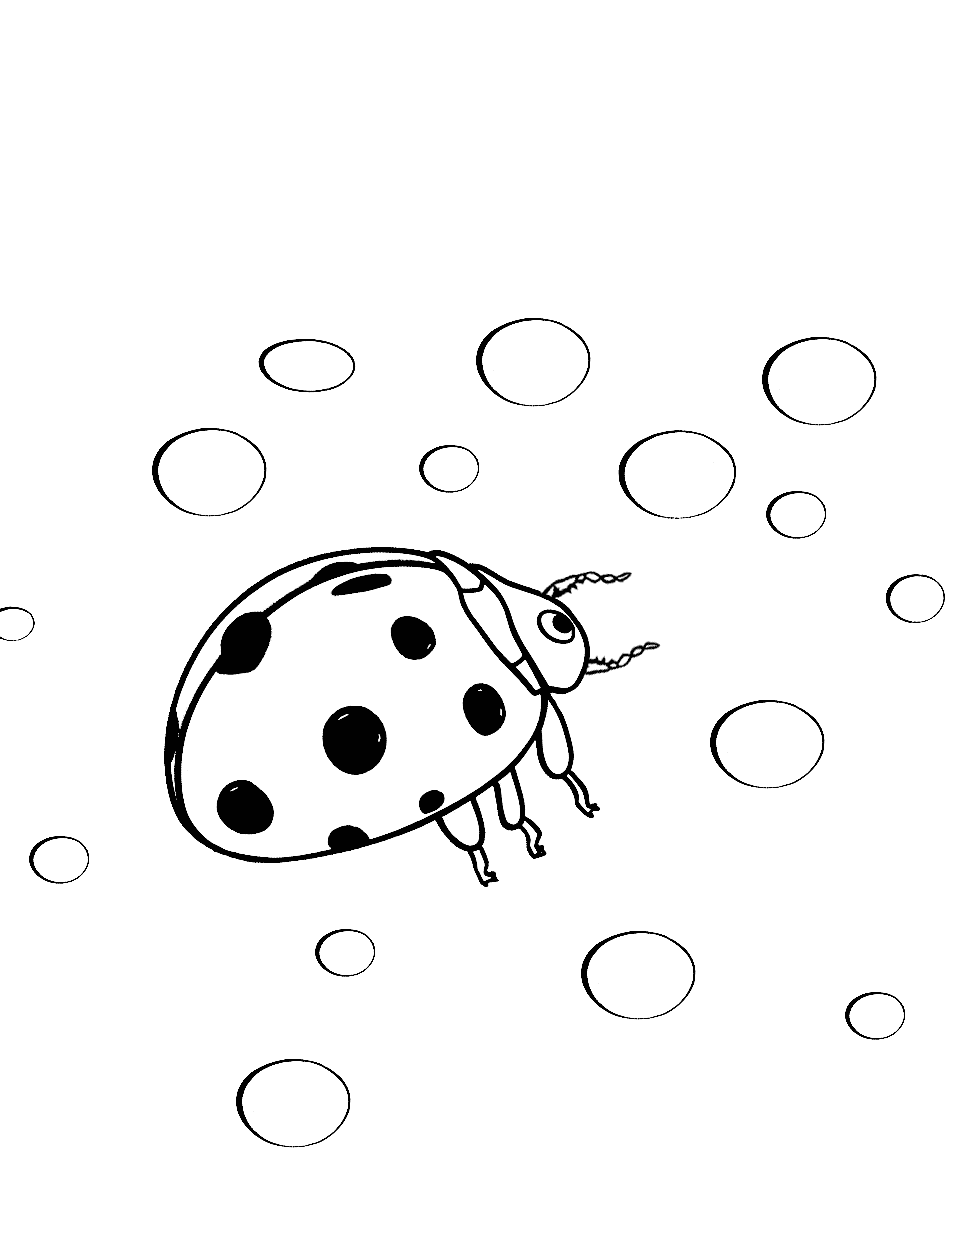 Baby Ladybug's Discovery Coloring Page - A baby ladybug encountering a dewdrop for the first time.